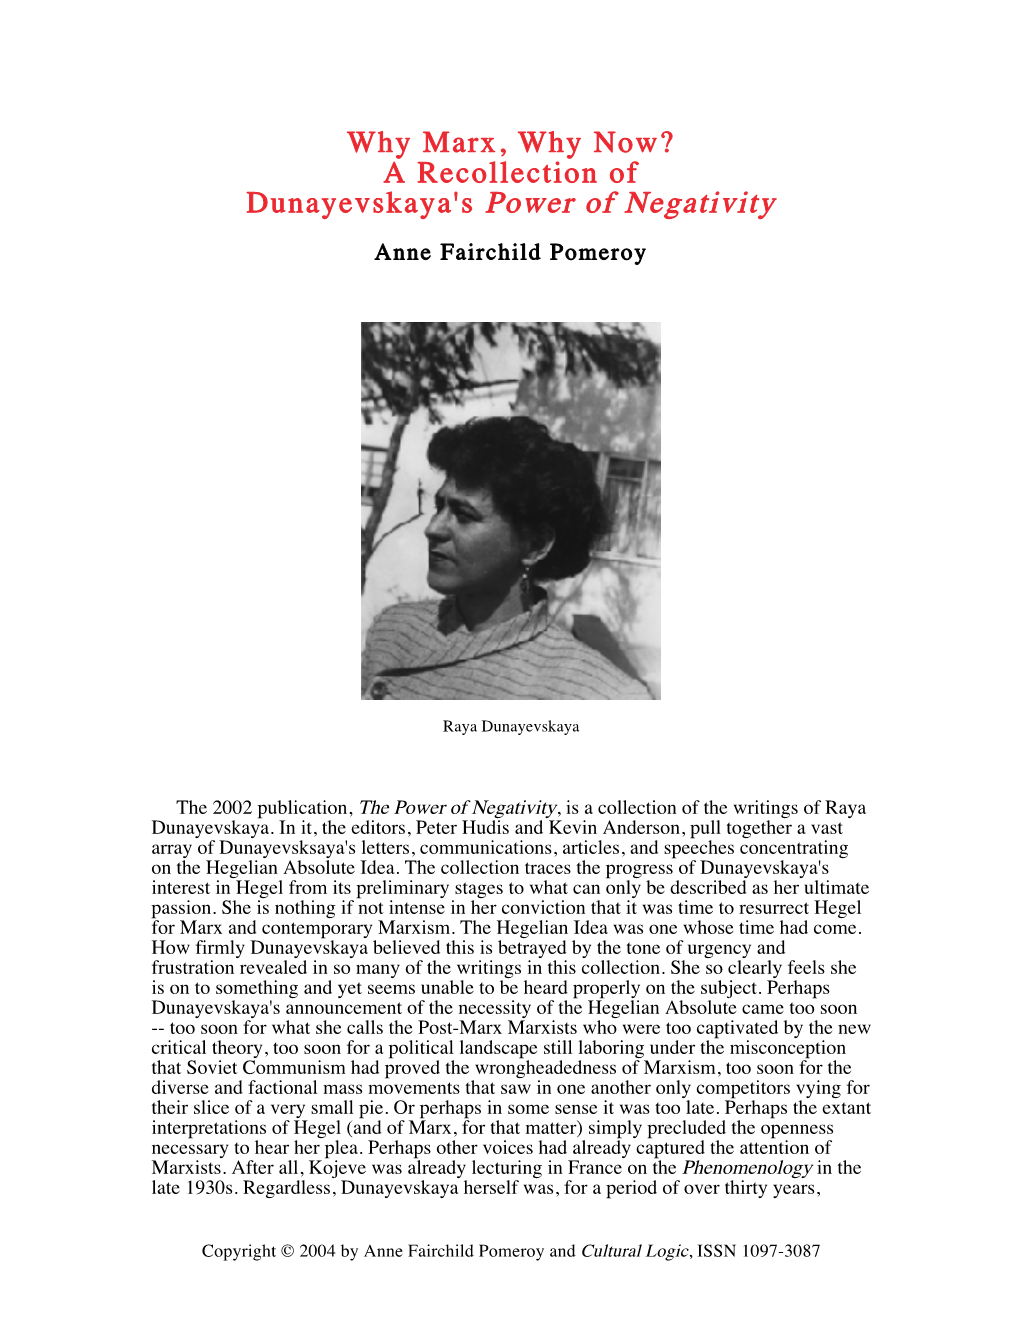 Why Marx, Why Now? a Recollection of Dunayevskaya's Power of Negativity